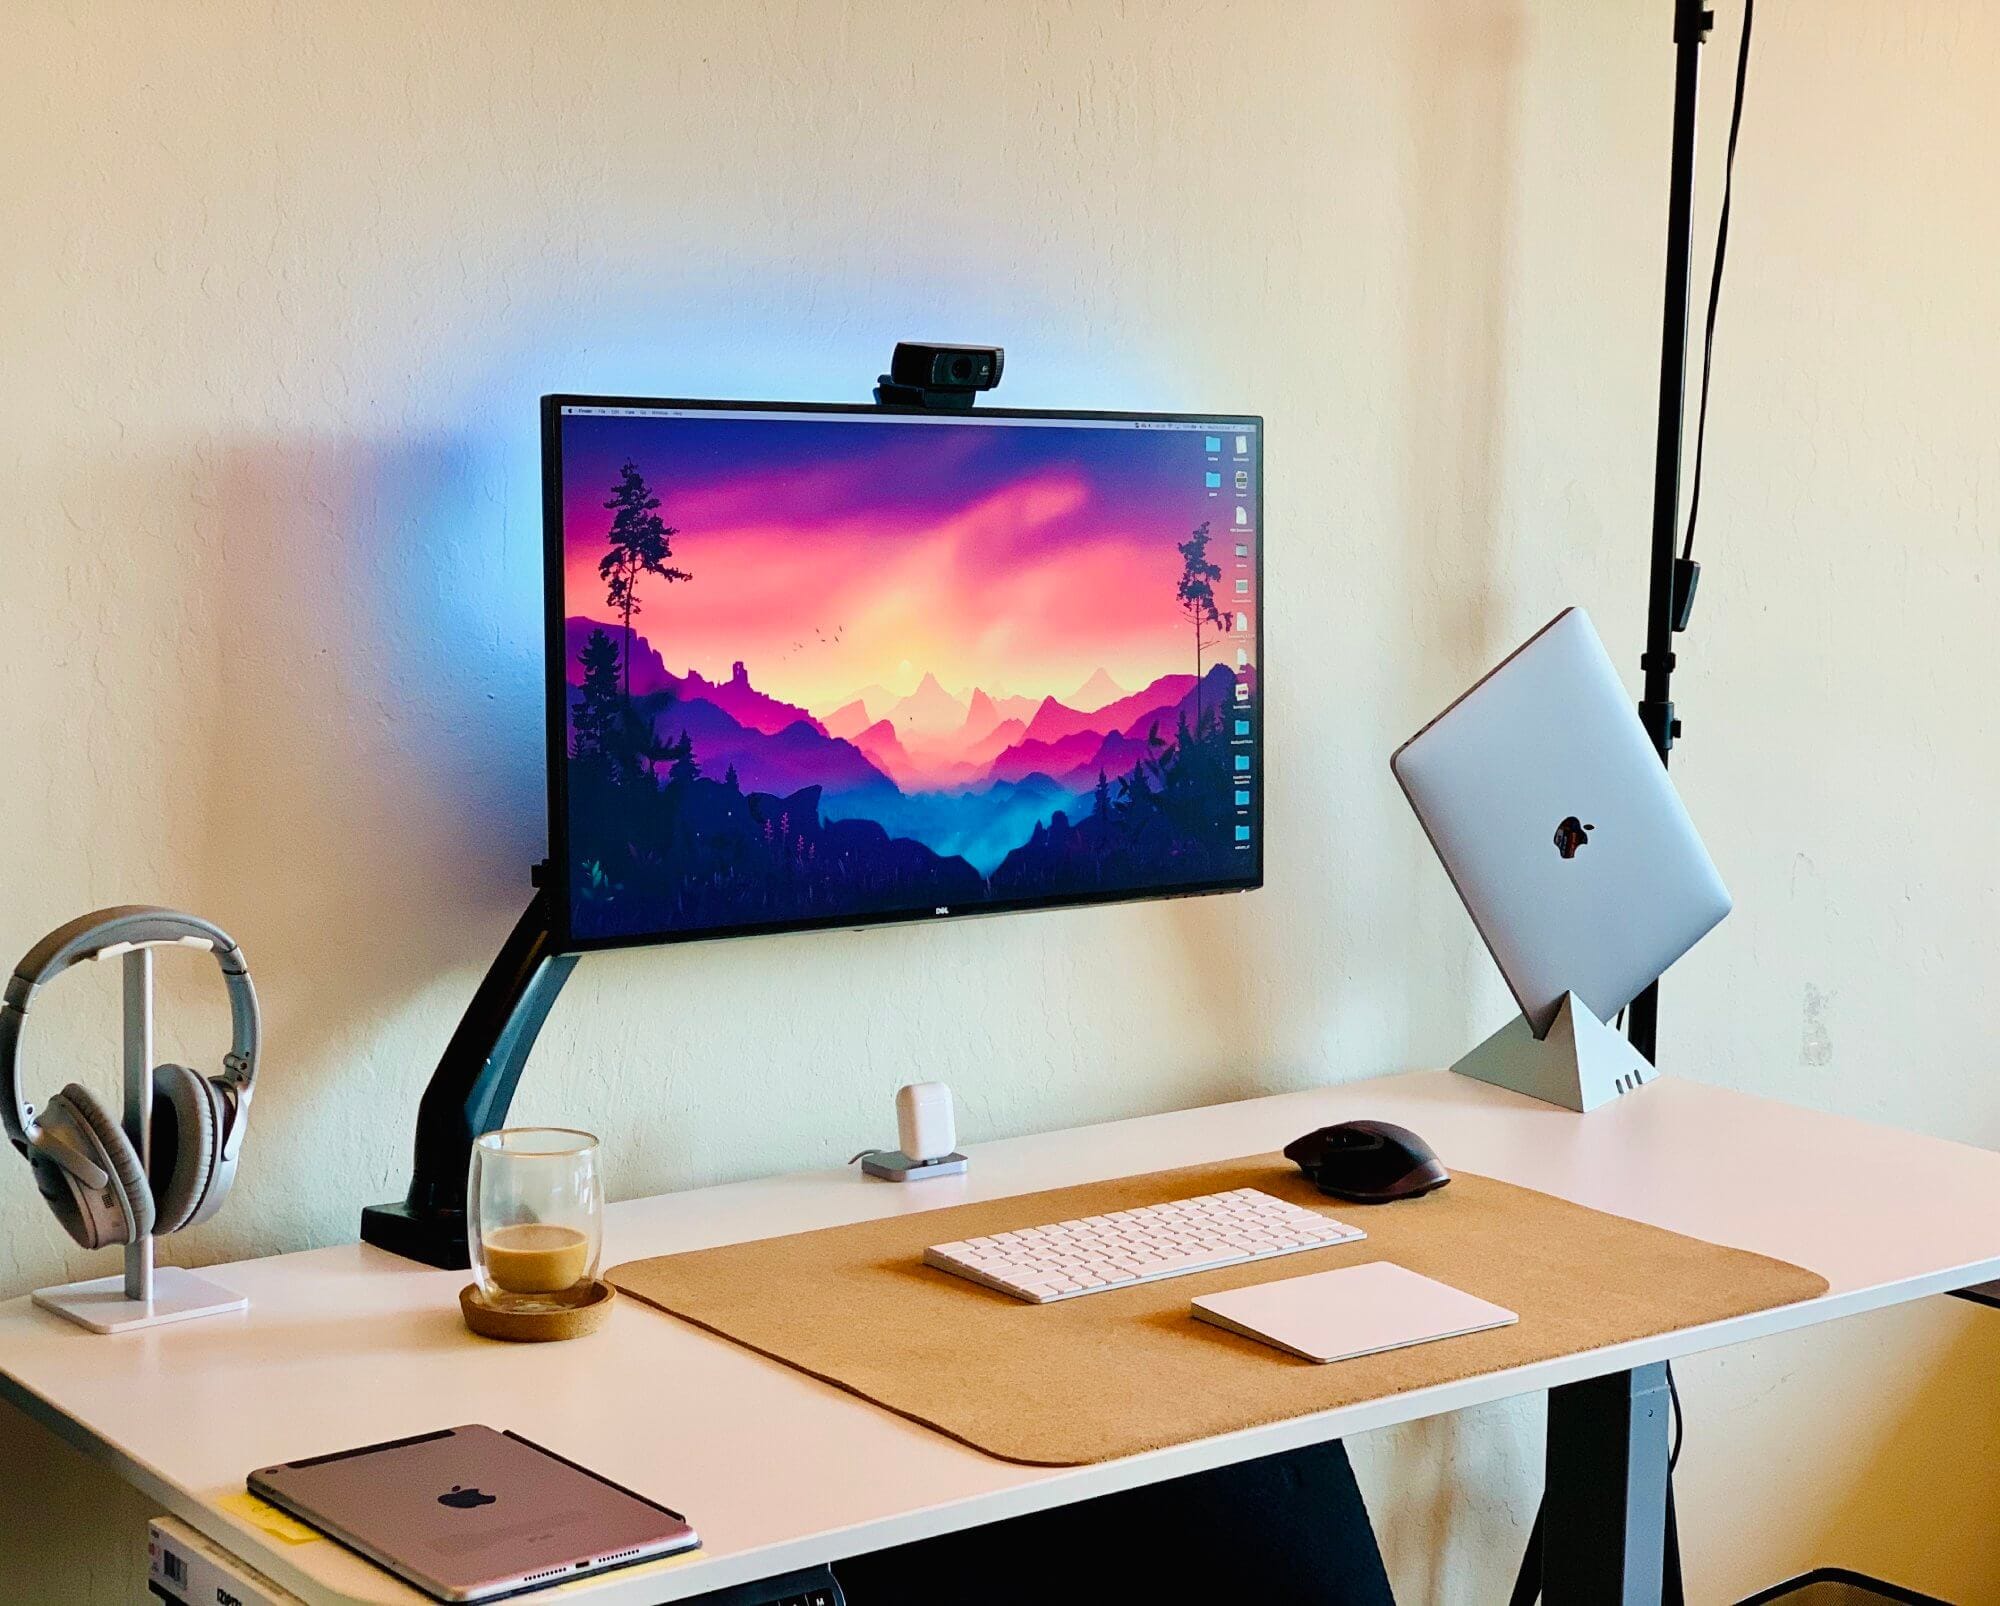 A simple desk setup with a monitor on an adjustable arm and a laptop on a custom stand